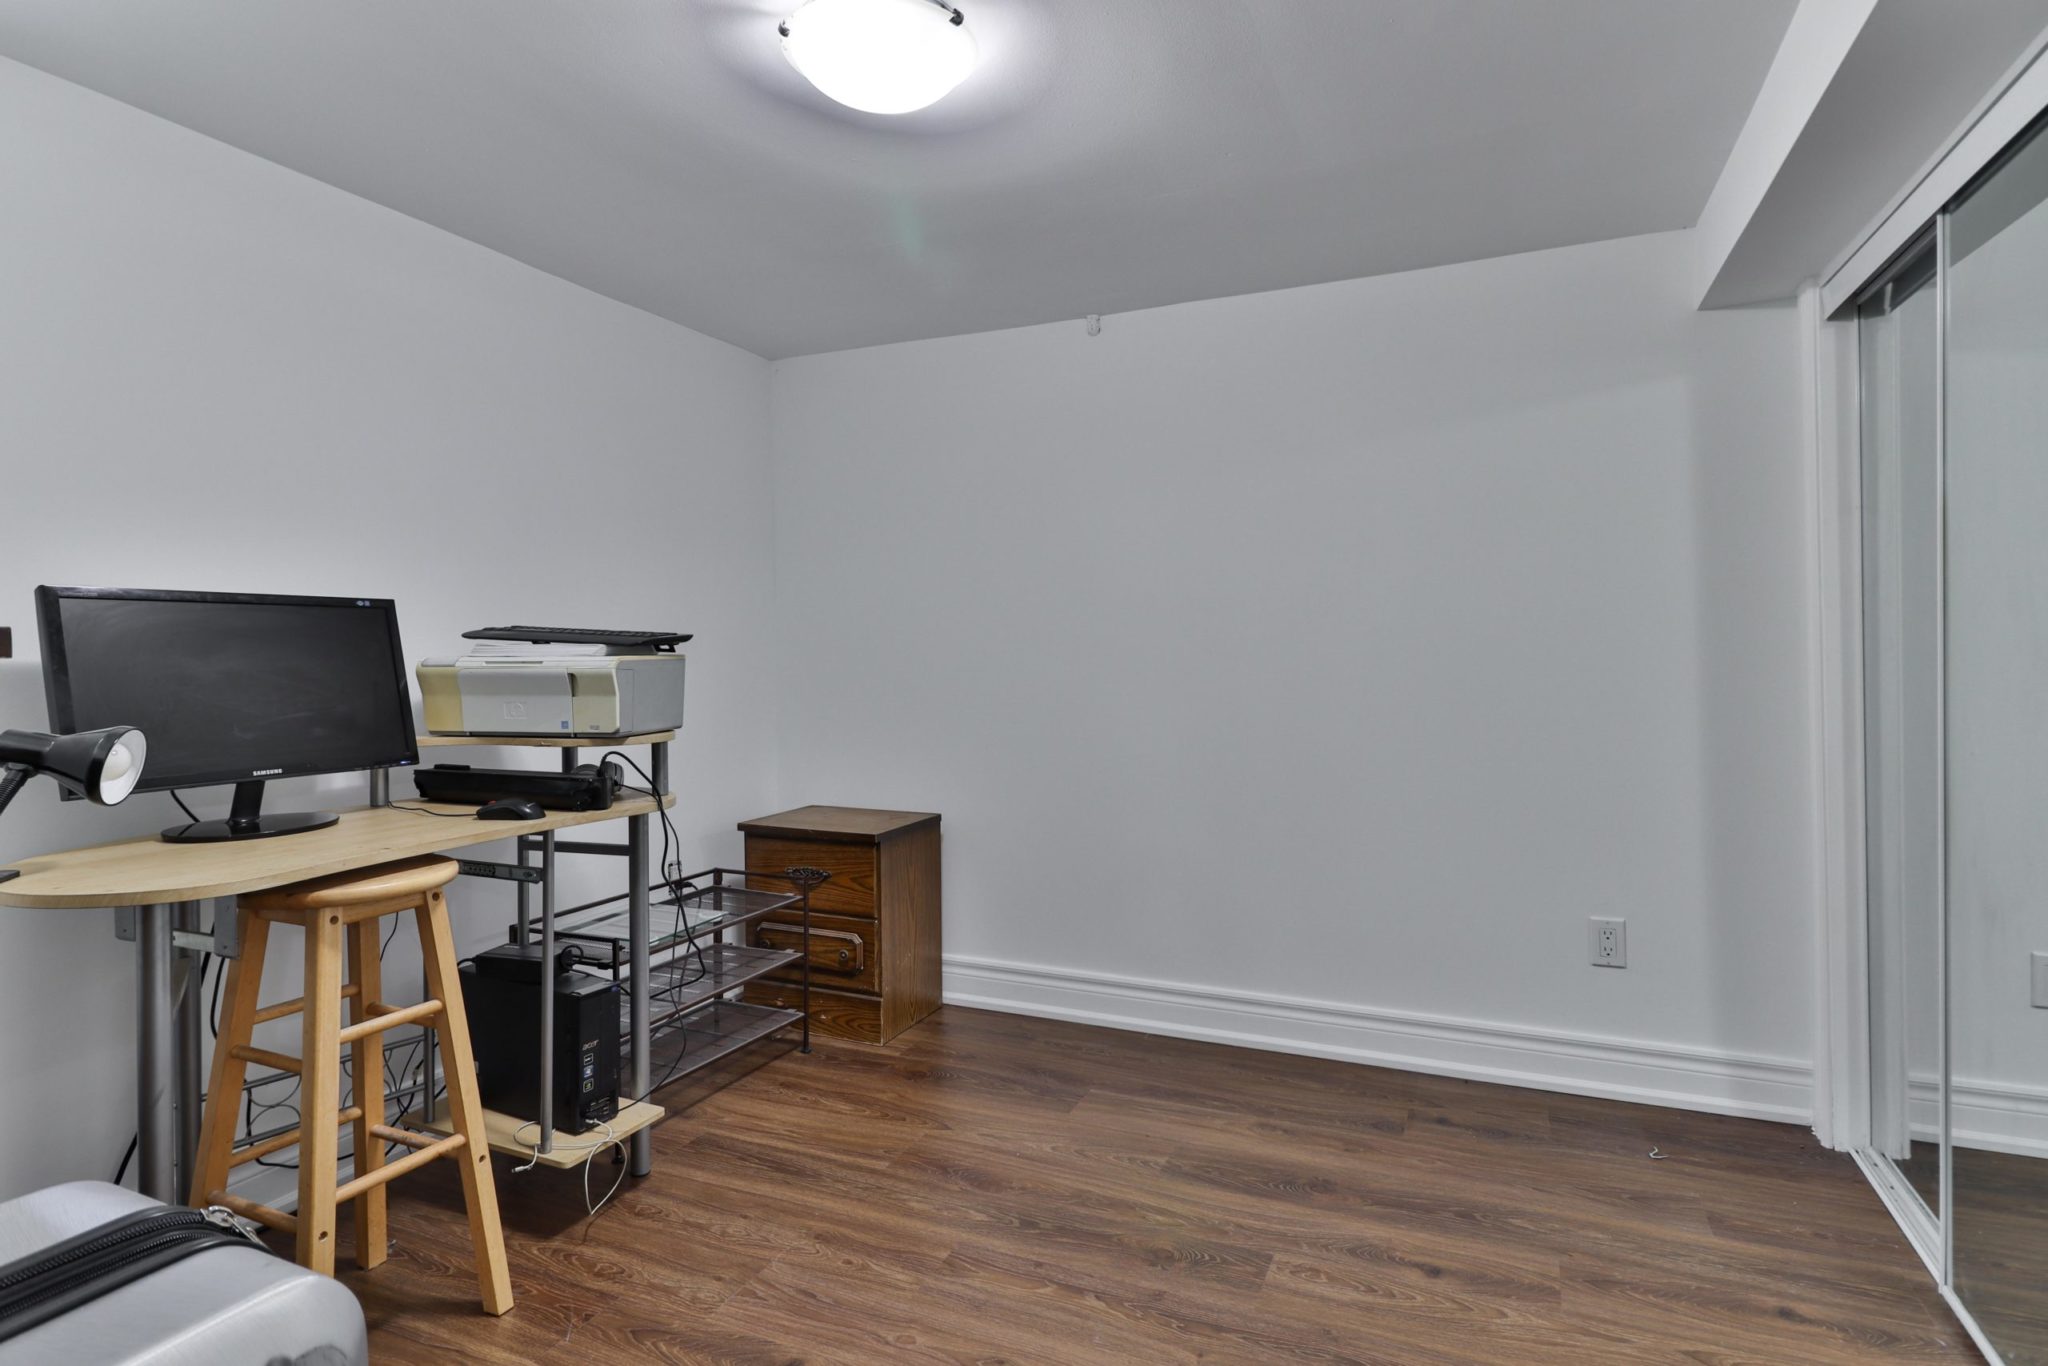 Basement bedroom being used as home office with computer, desk and chair.